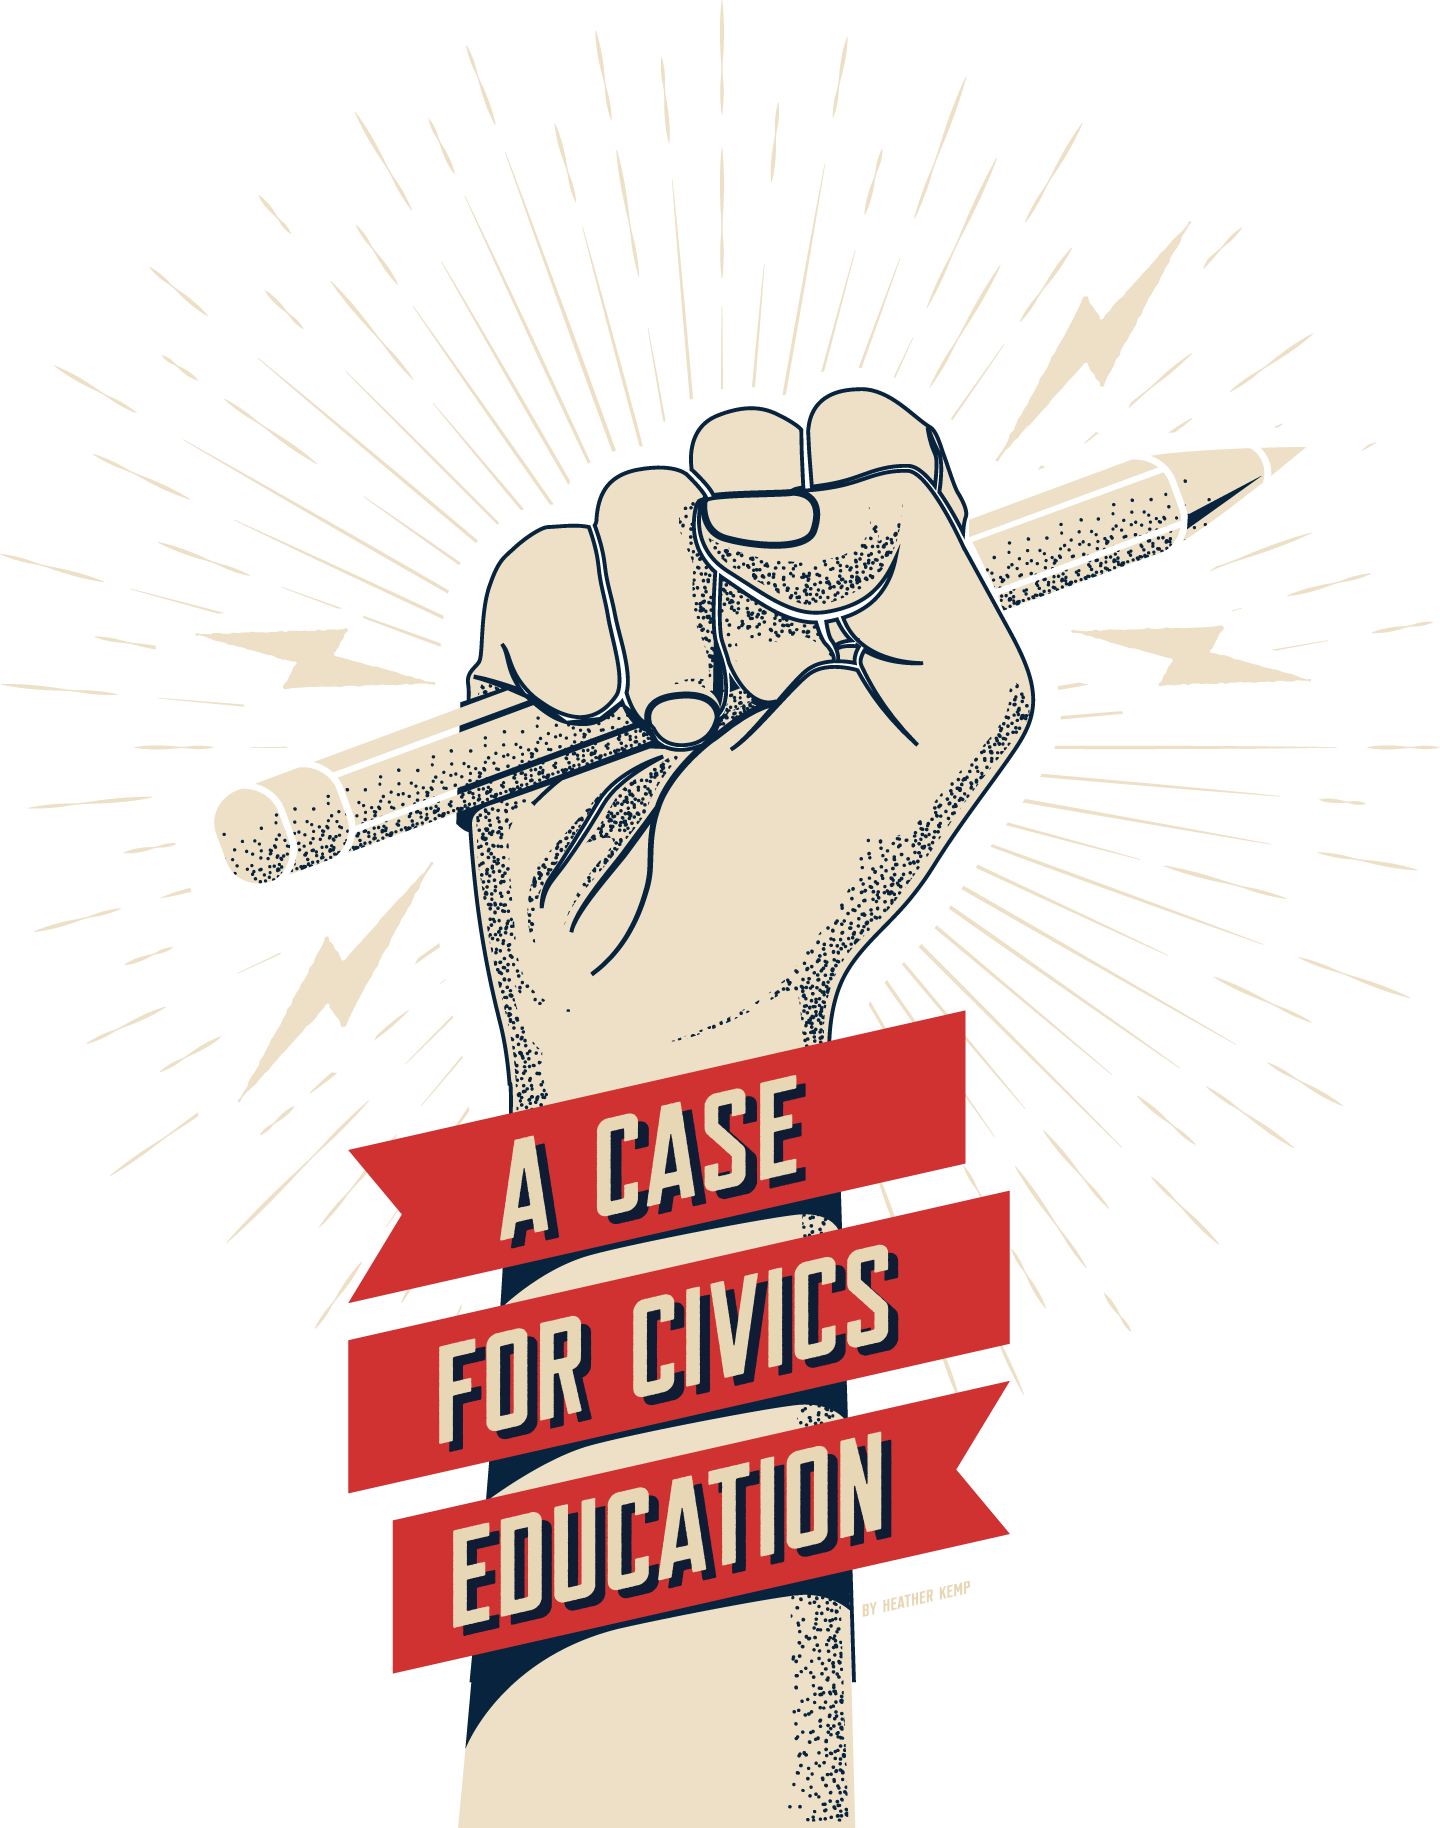 A Case for Civics Education